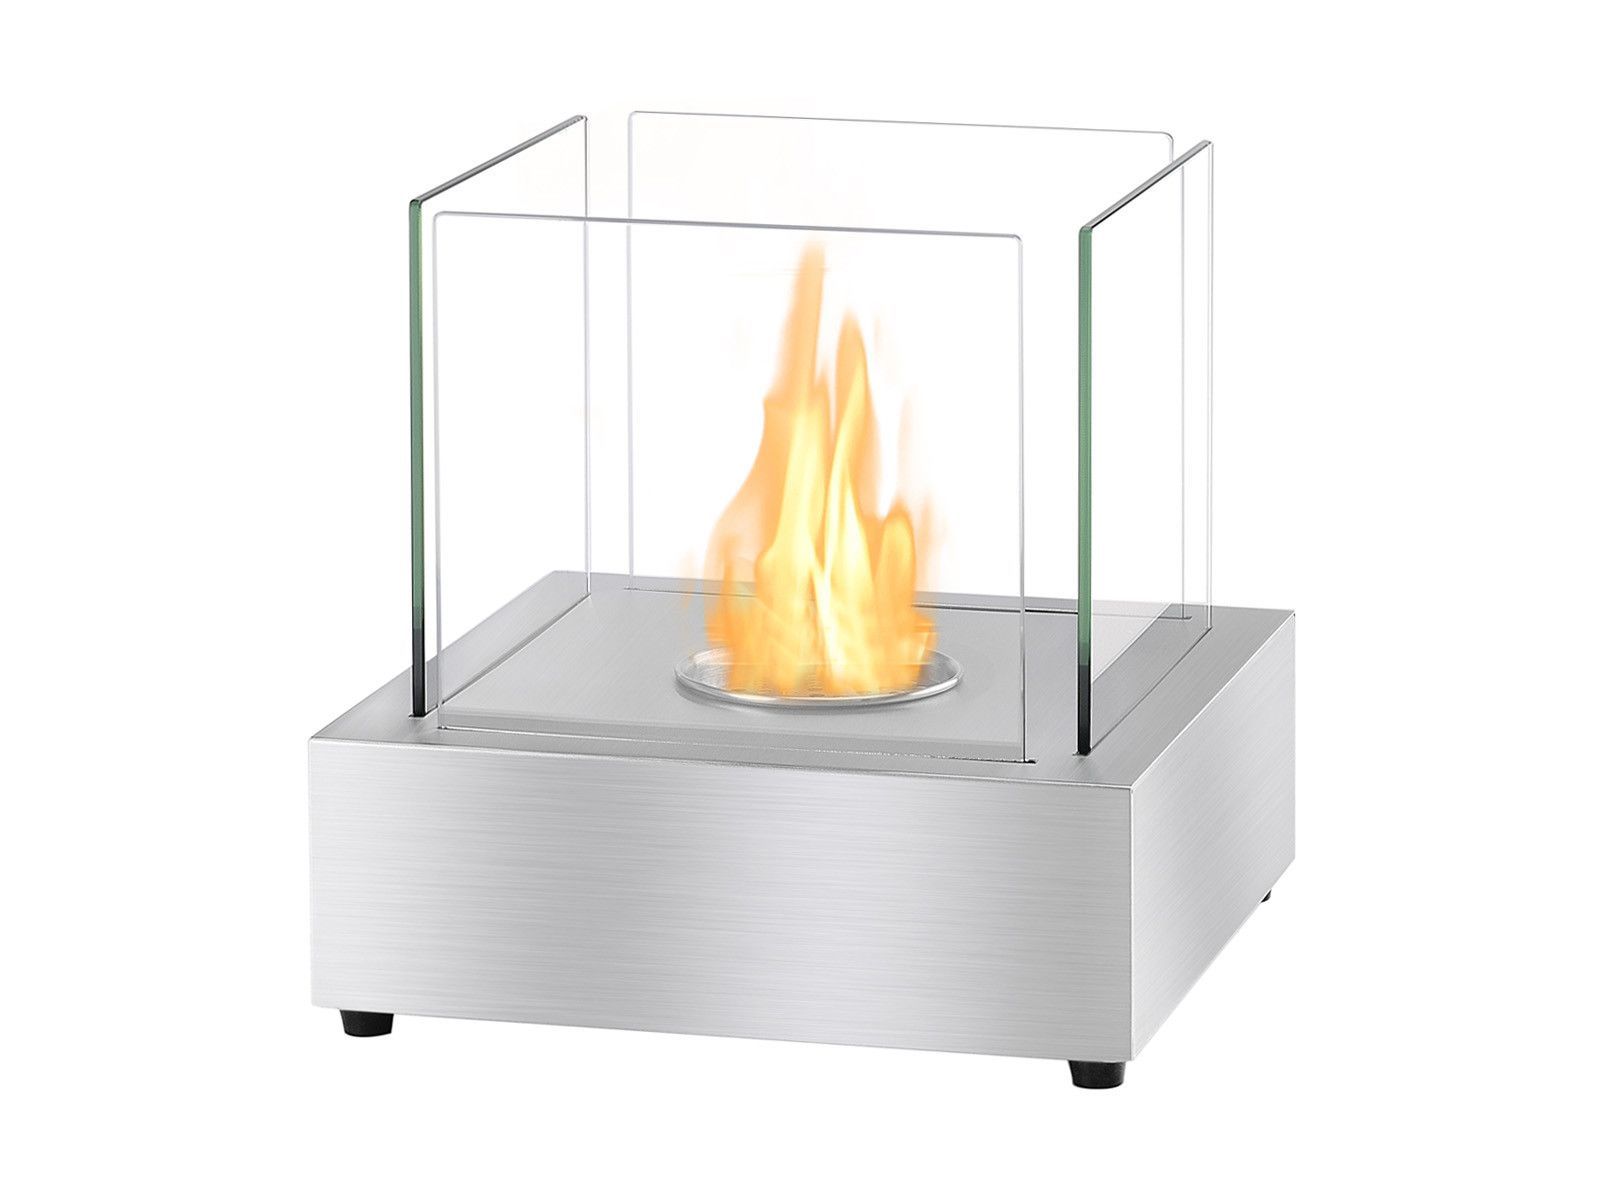 Tabletop Electric Fireplace Elegant Cube Tabletop Ventless Ethanol Fireplace